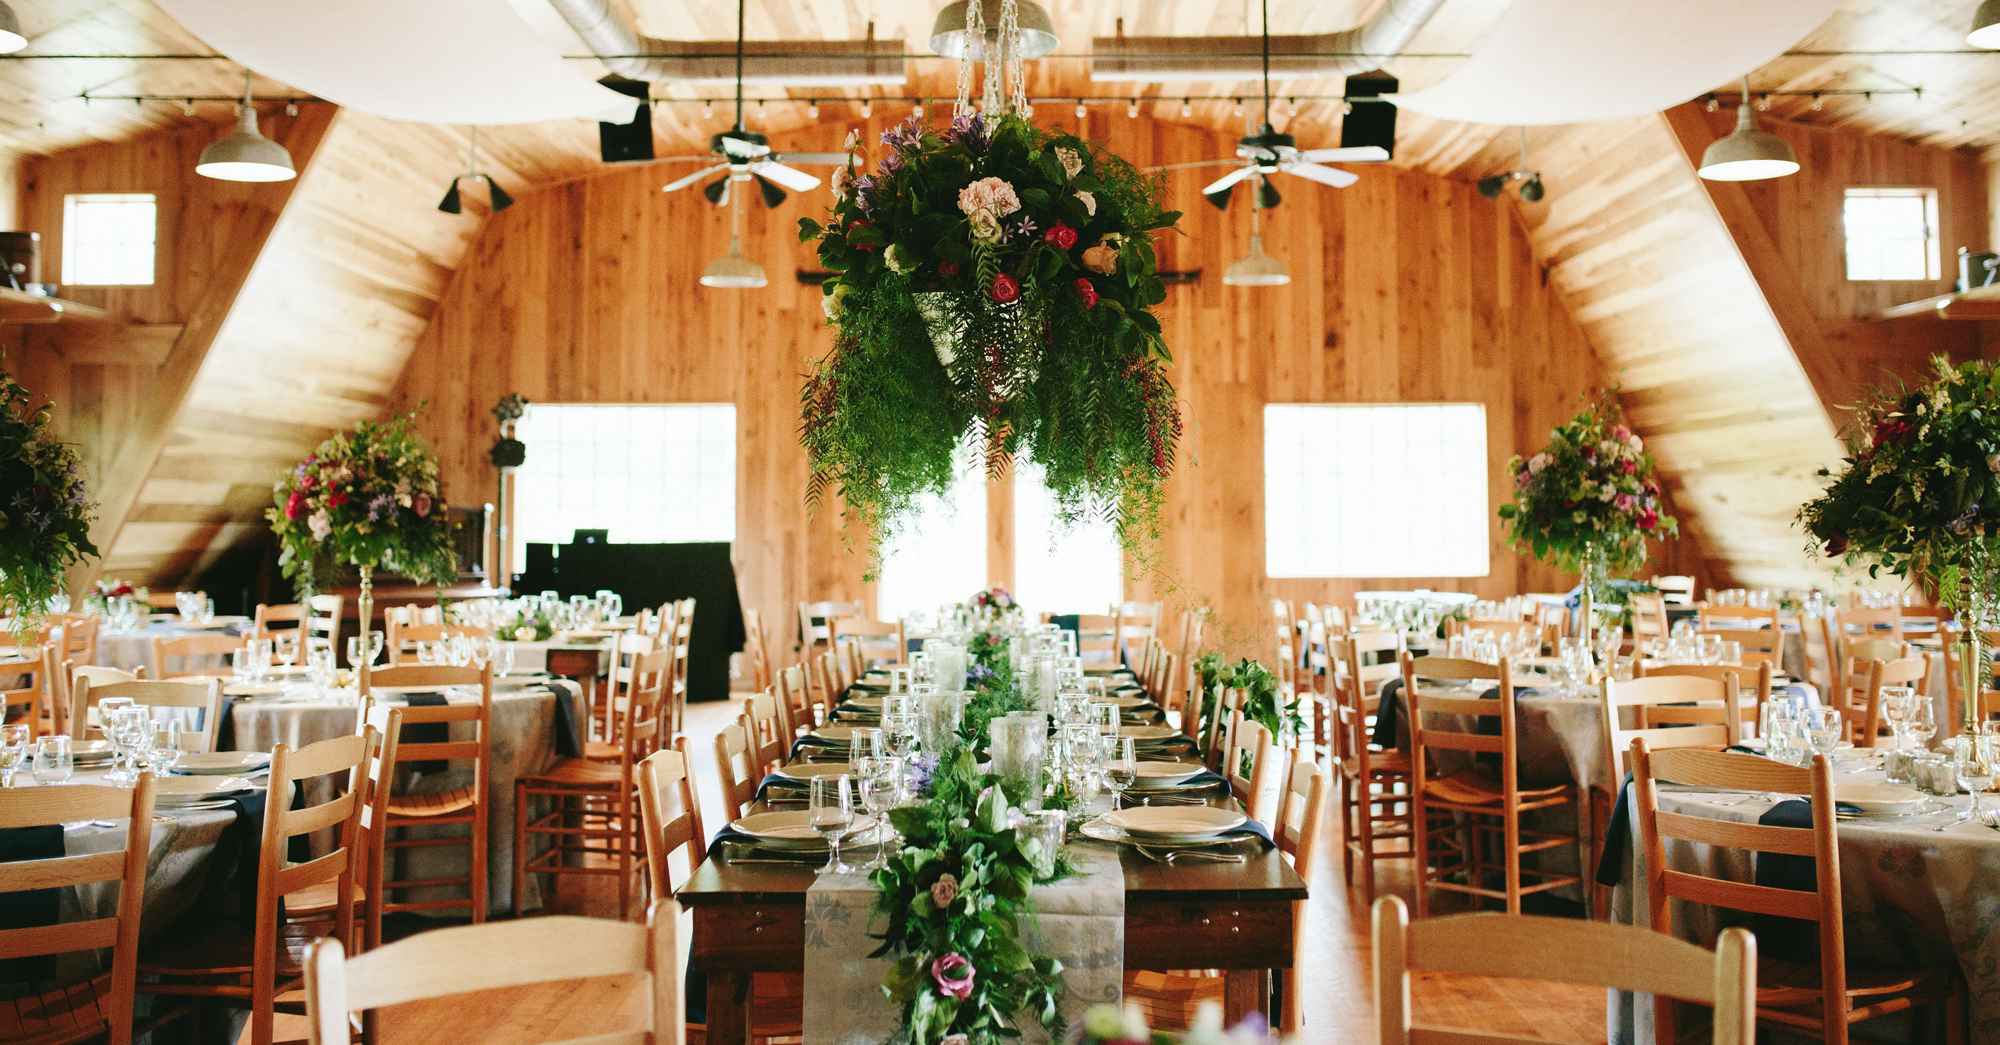 20 Easy Ways To Decorate Your Wedding Reception